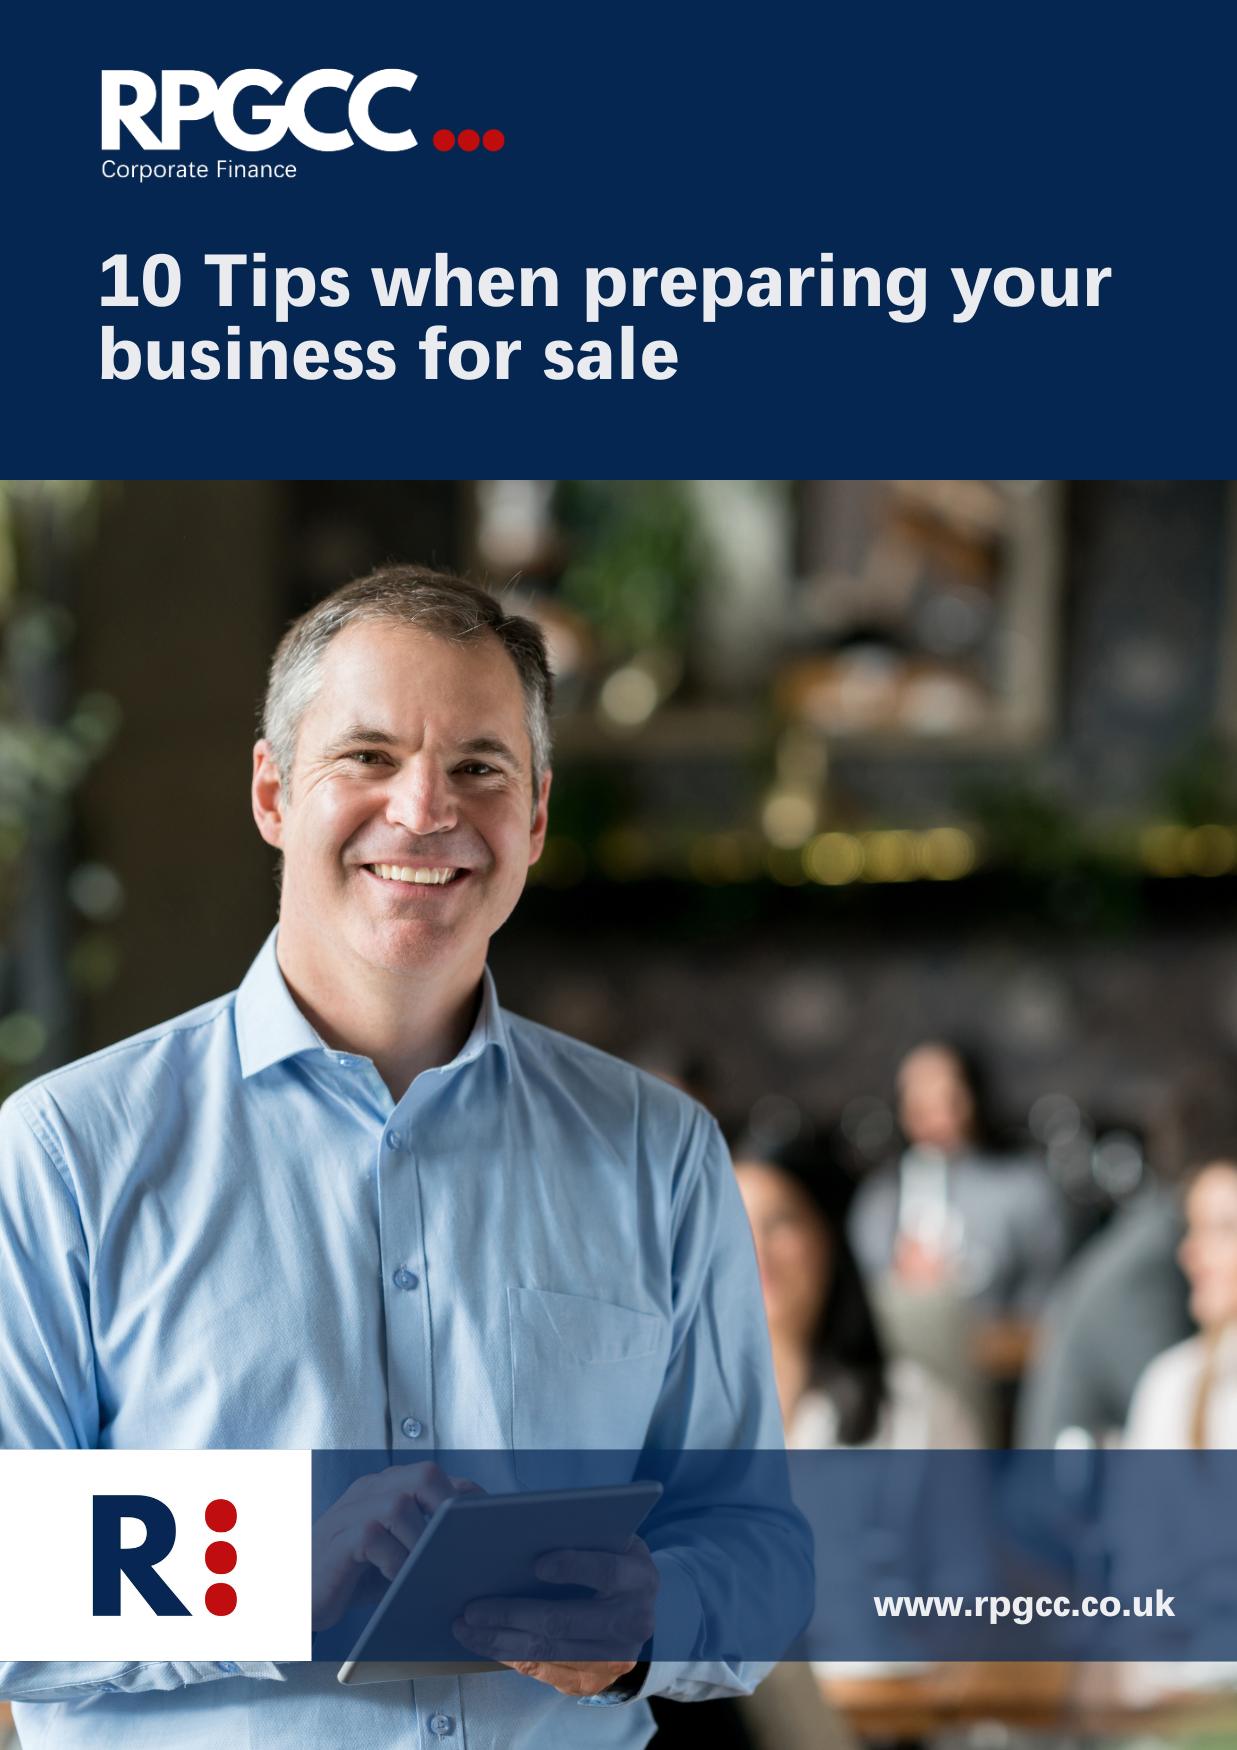 10 tips when preparing your business for sale